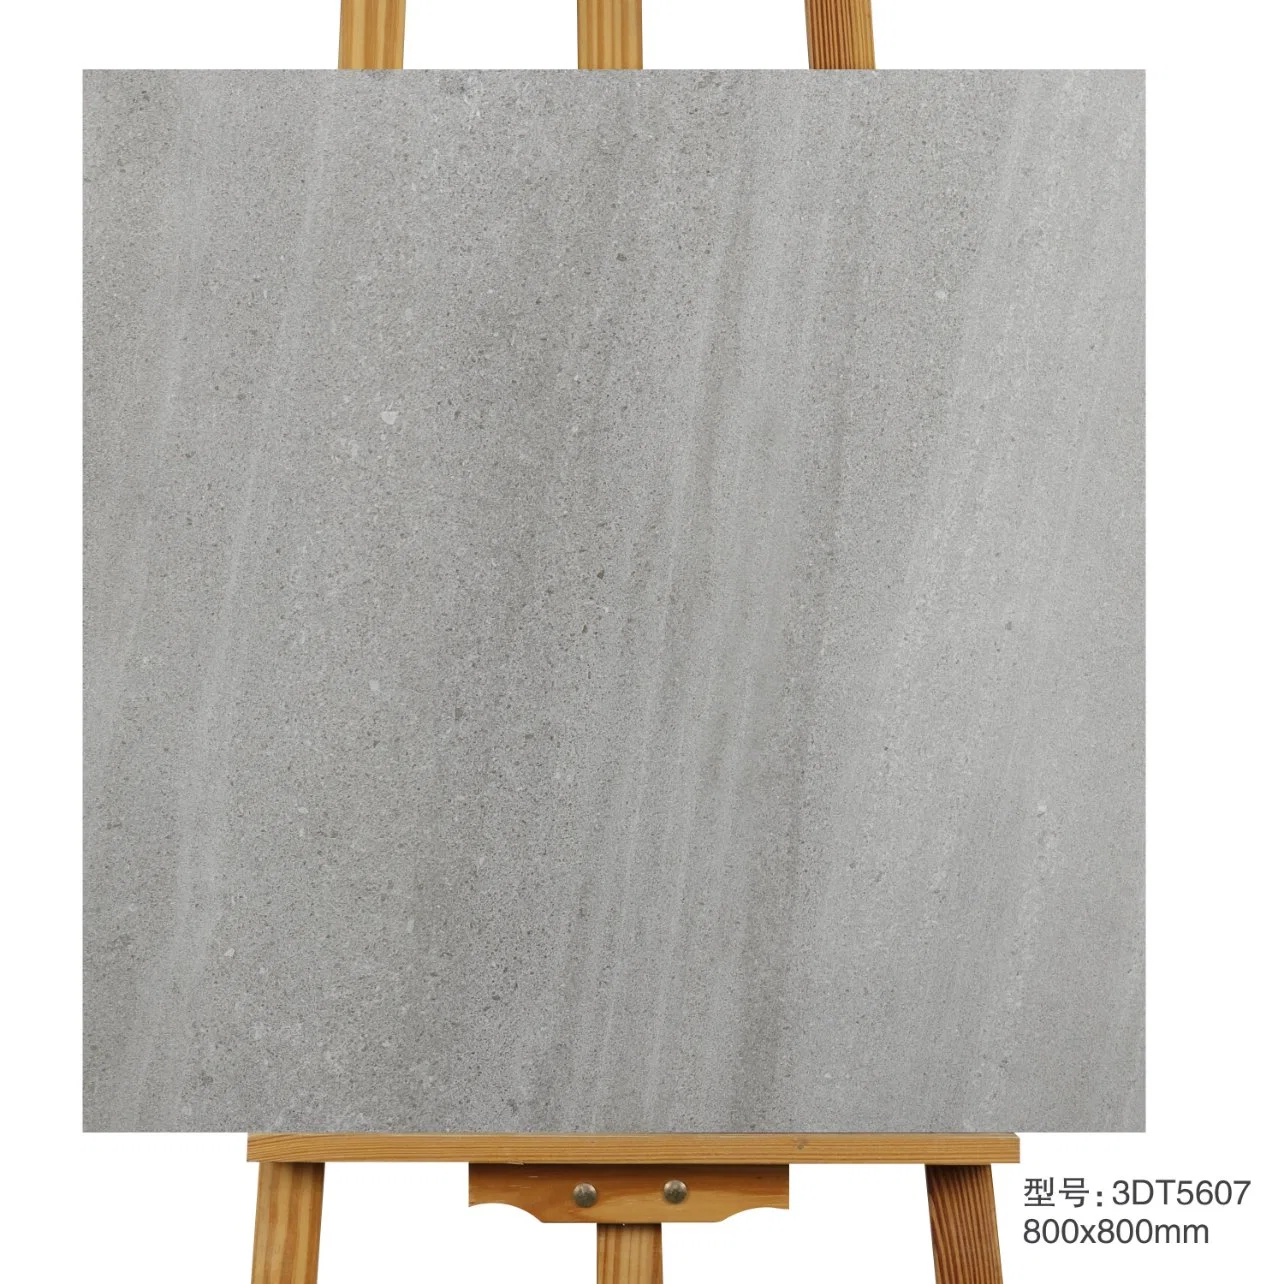 600X600mm Soft Finish Grey Porcelain Tile Floor and Wall for Building